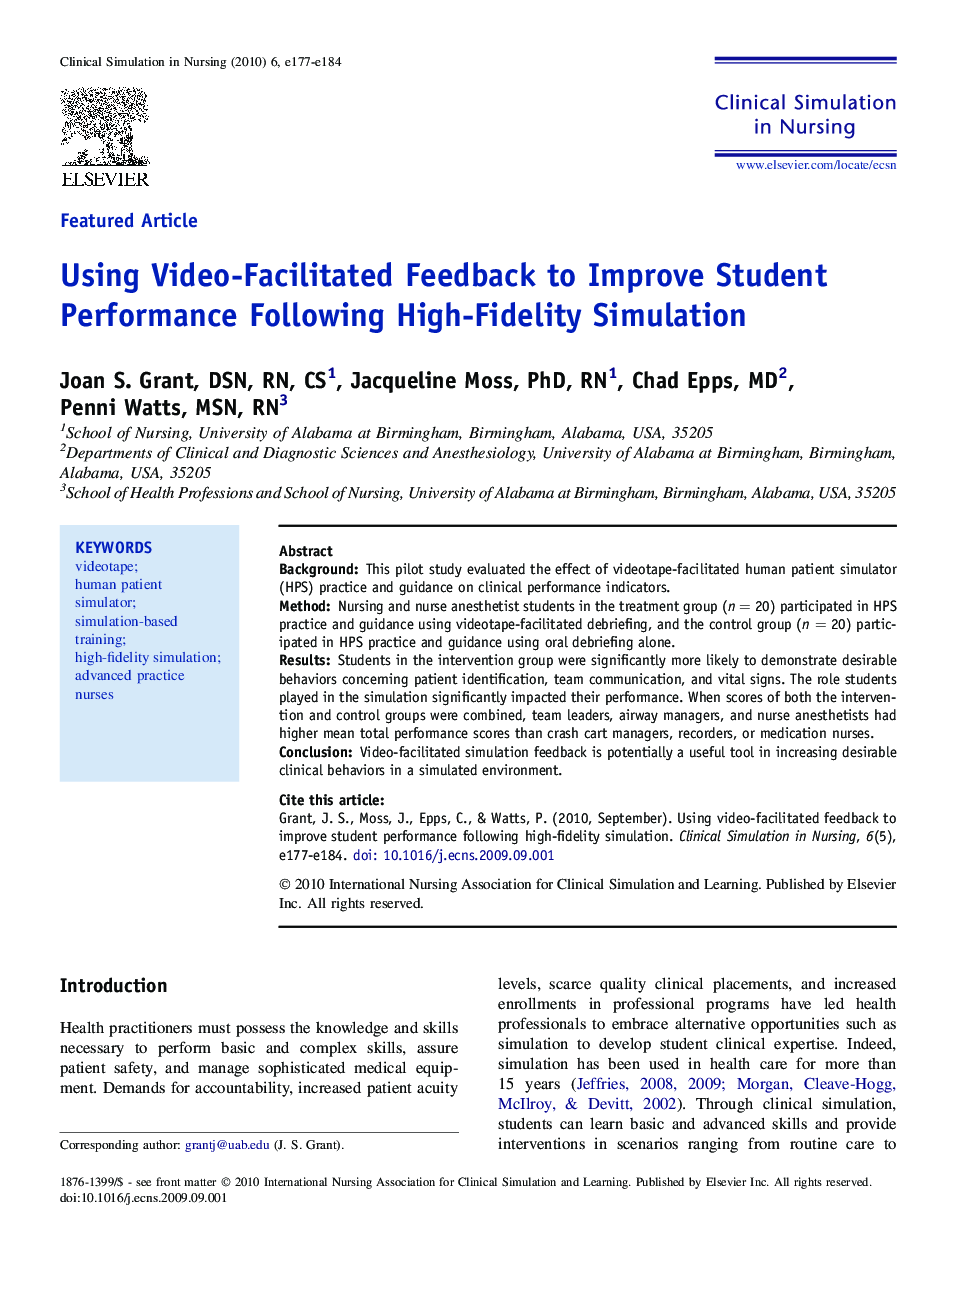 Using Video-Facilitated Feedback to Improve Student Performance Following High-Fidelity Simulation 